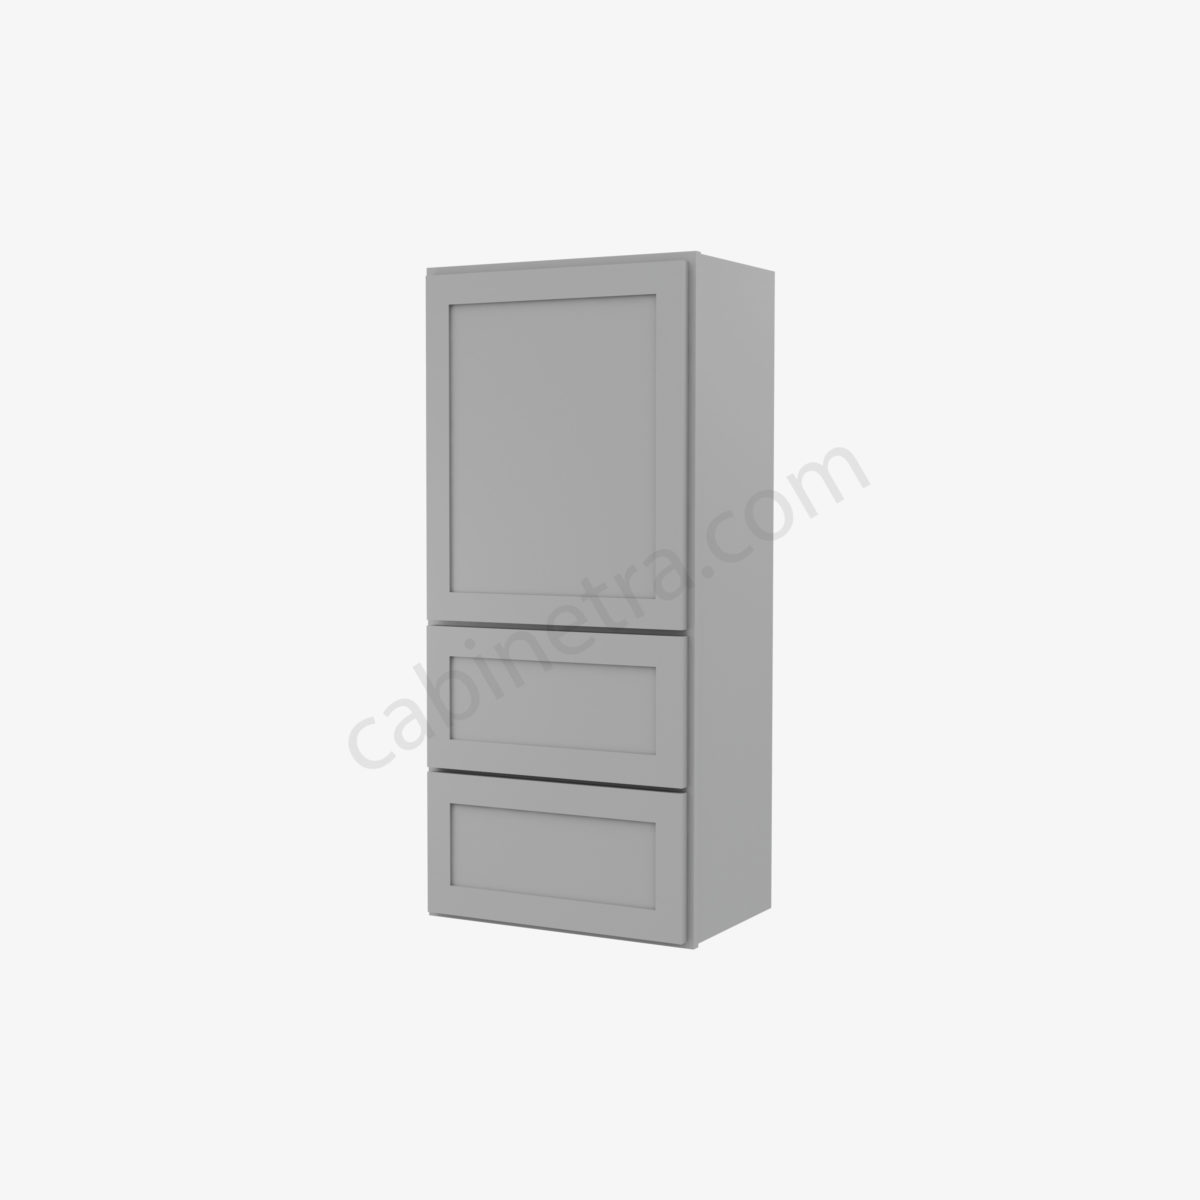 AB W2D1848 0 Forevermark Lait Gray Shaker Cabinetra scaled